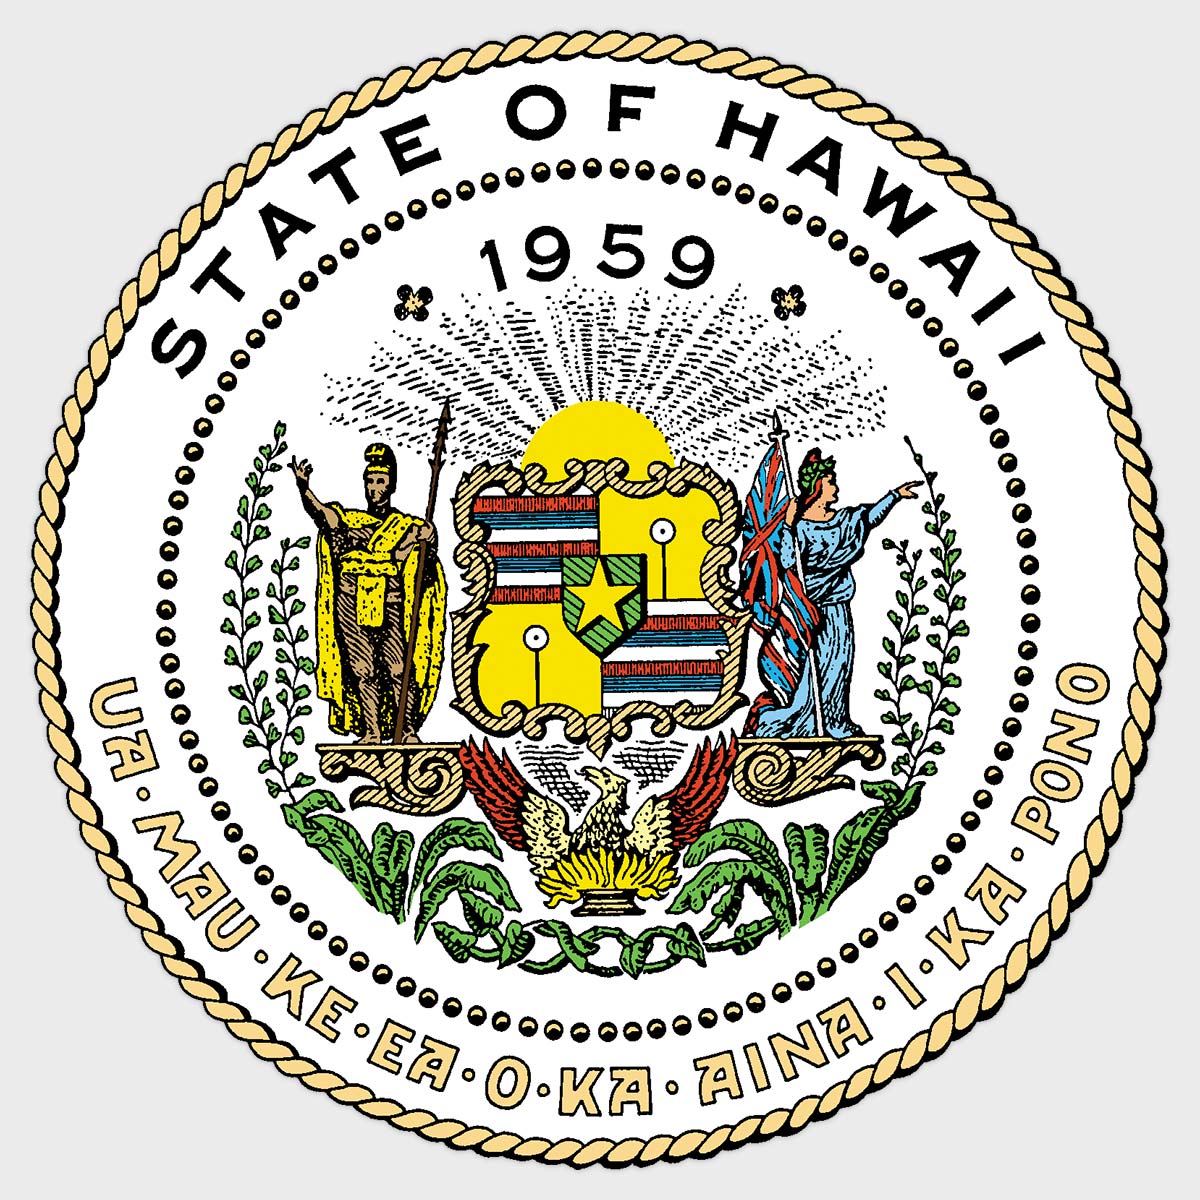 NEWS RELEASE: 11 Companies Continue in the State of Hawaii’s Digital Currency Innovation Lab